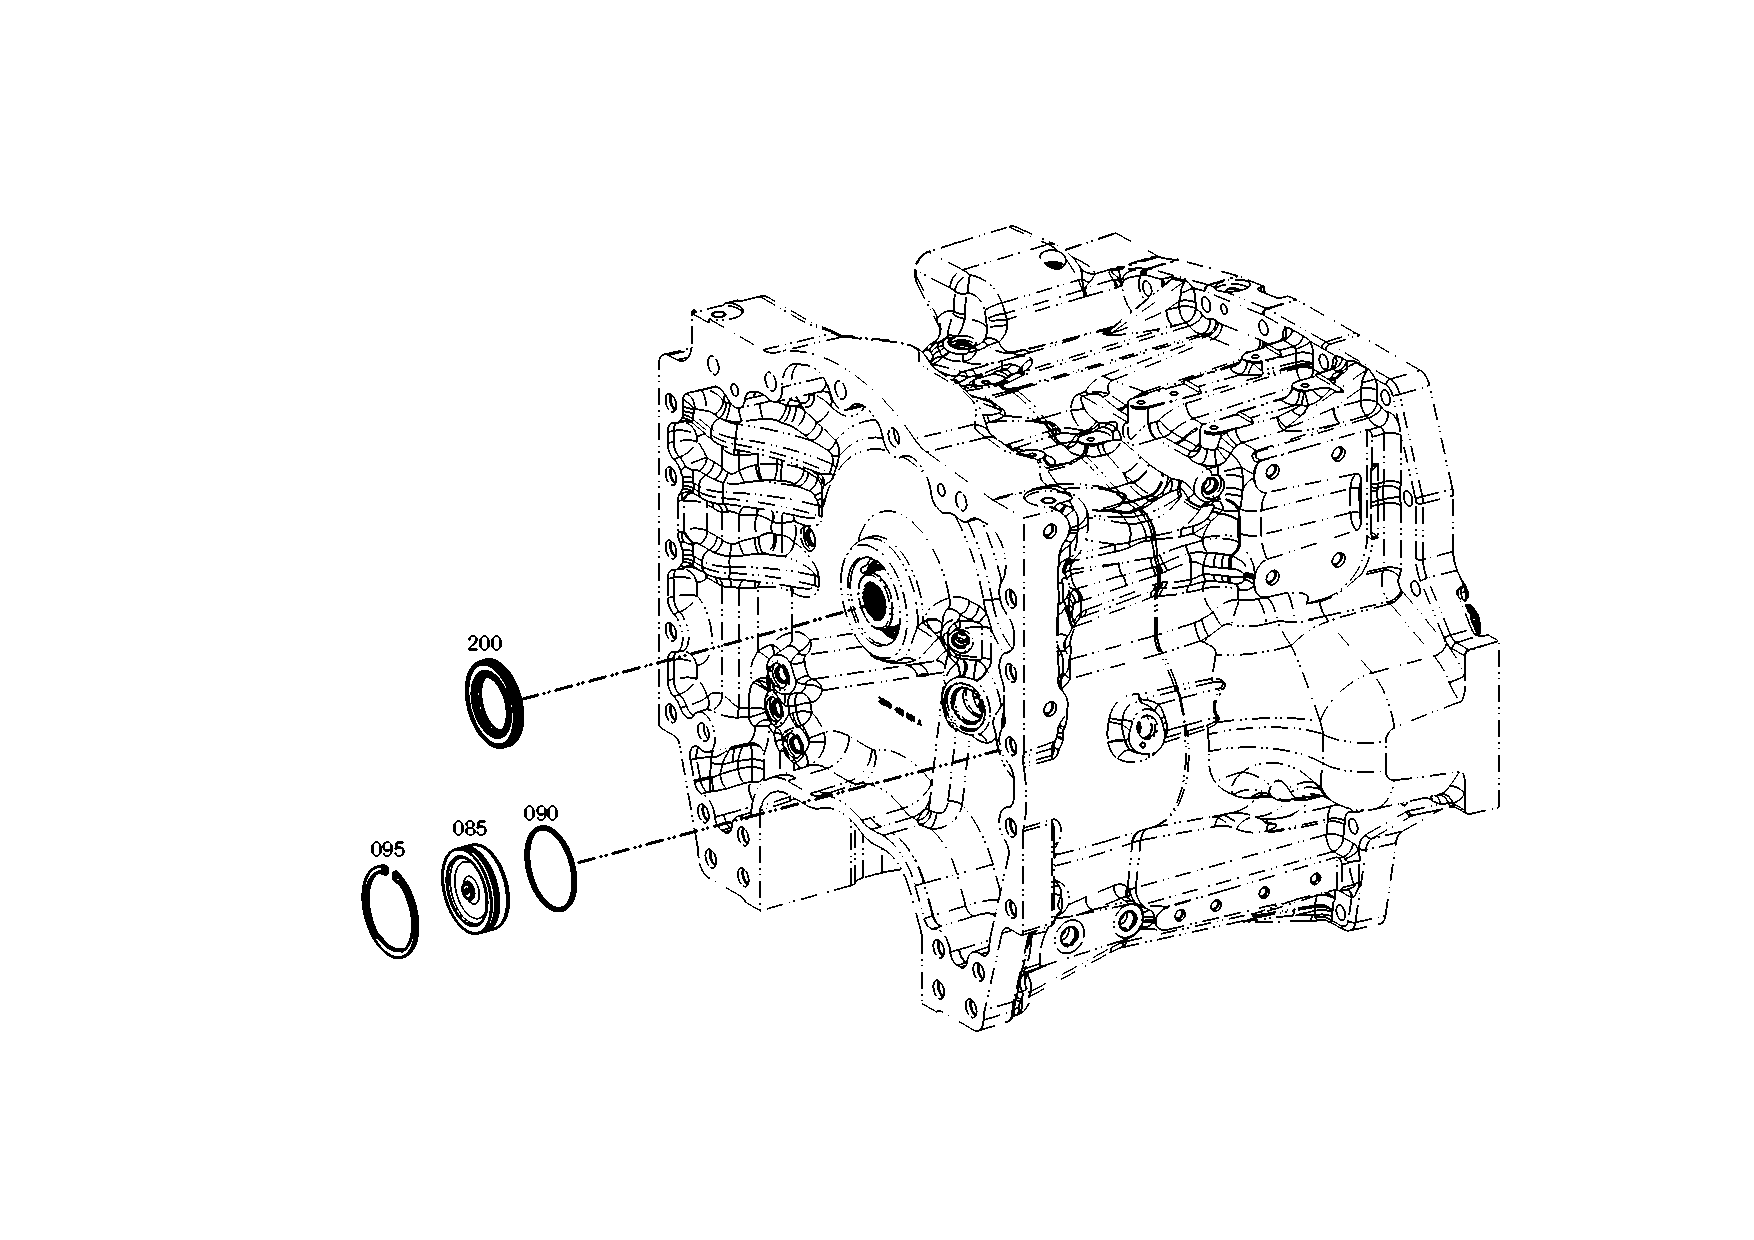 drawing for CNH NEW HOLLAND 185533A1 - BALL BEARING (figure 3)